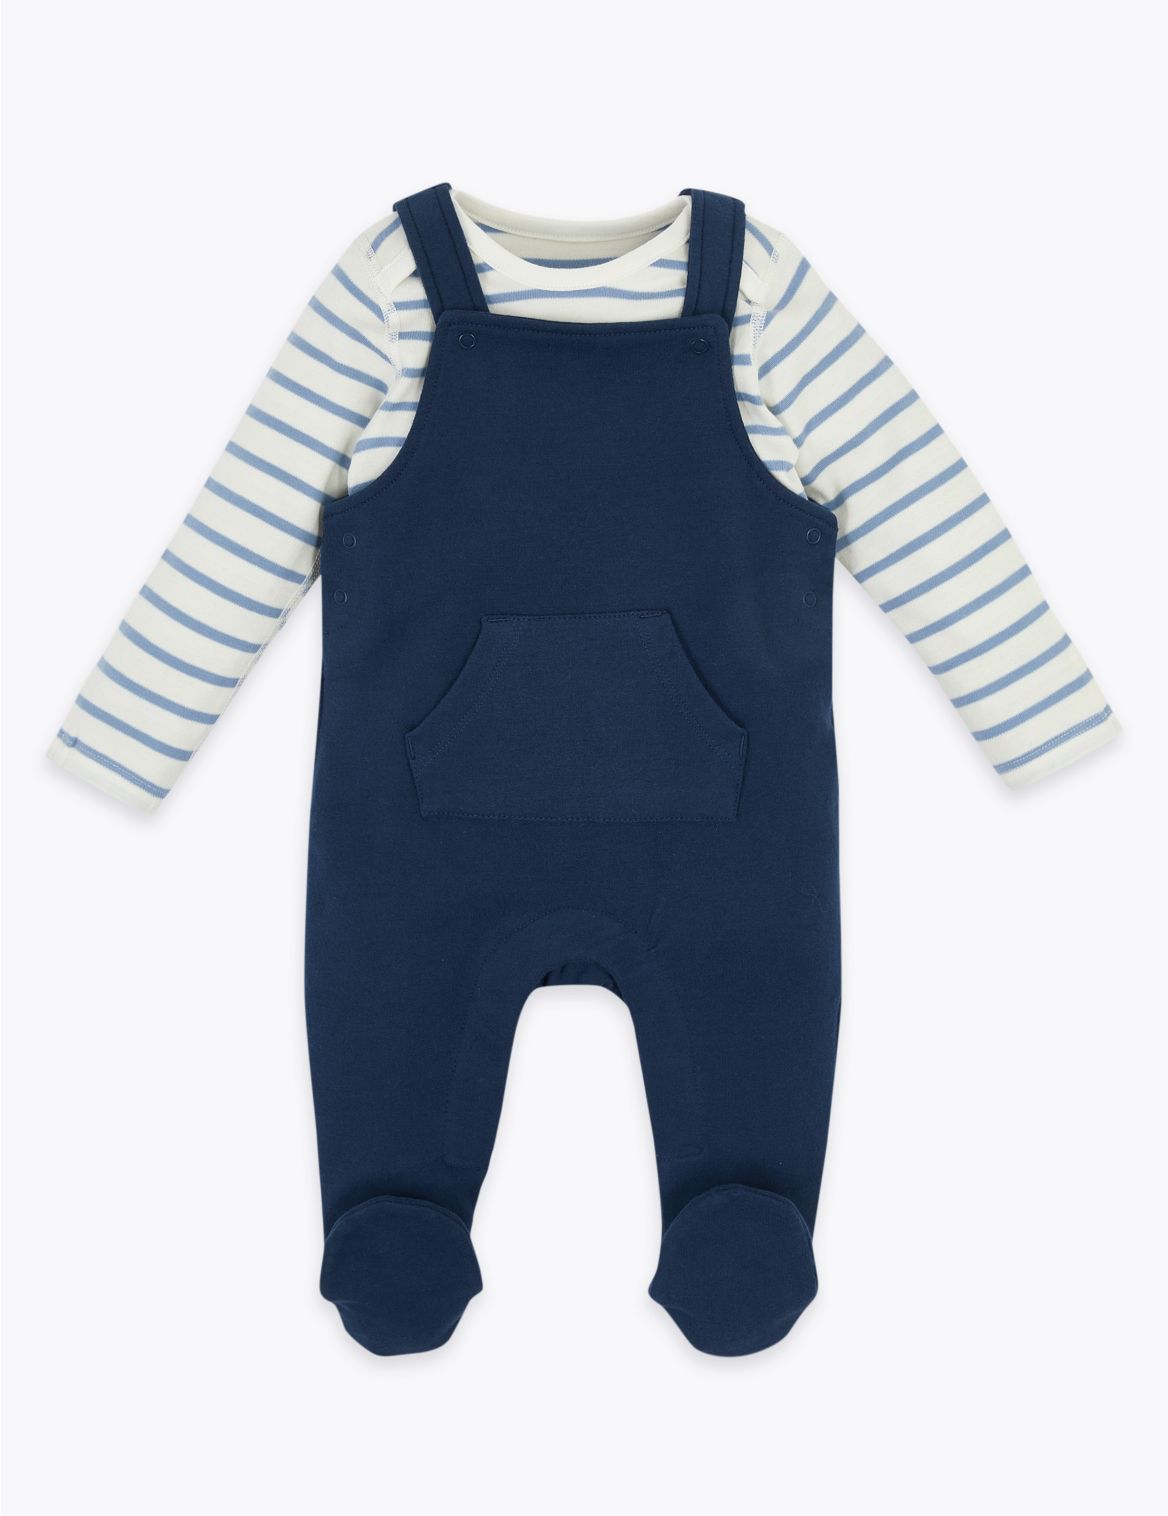 2pc Striped Dungarees Outfit (7lbs-12 Mths) navy